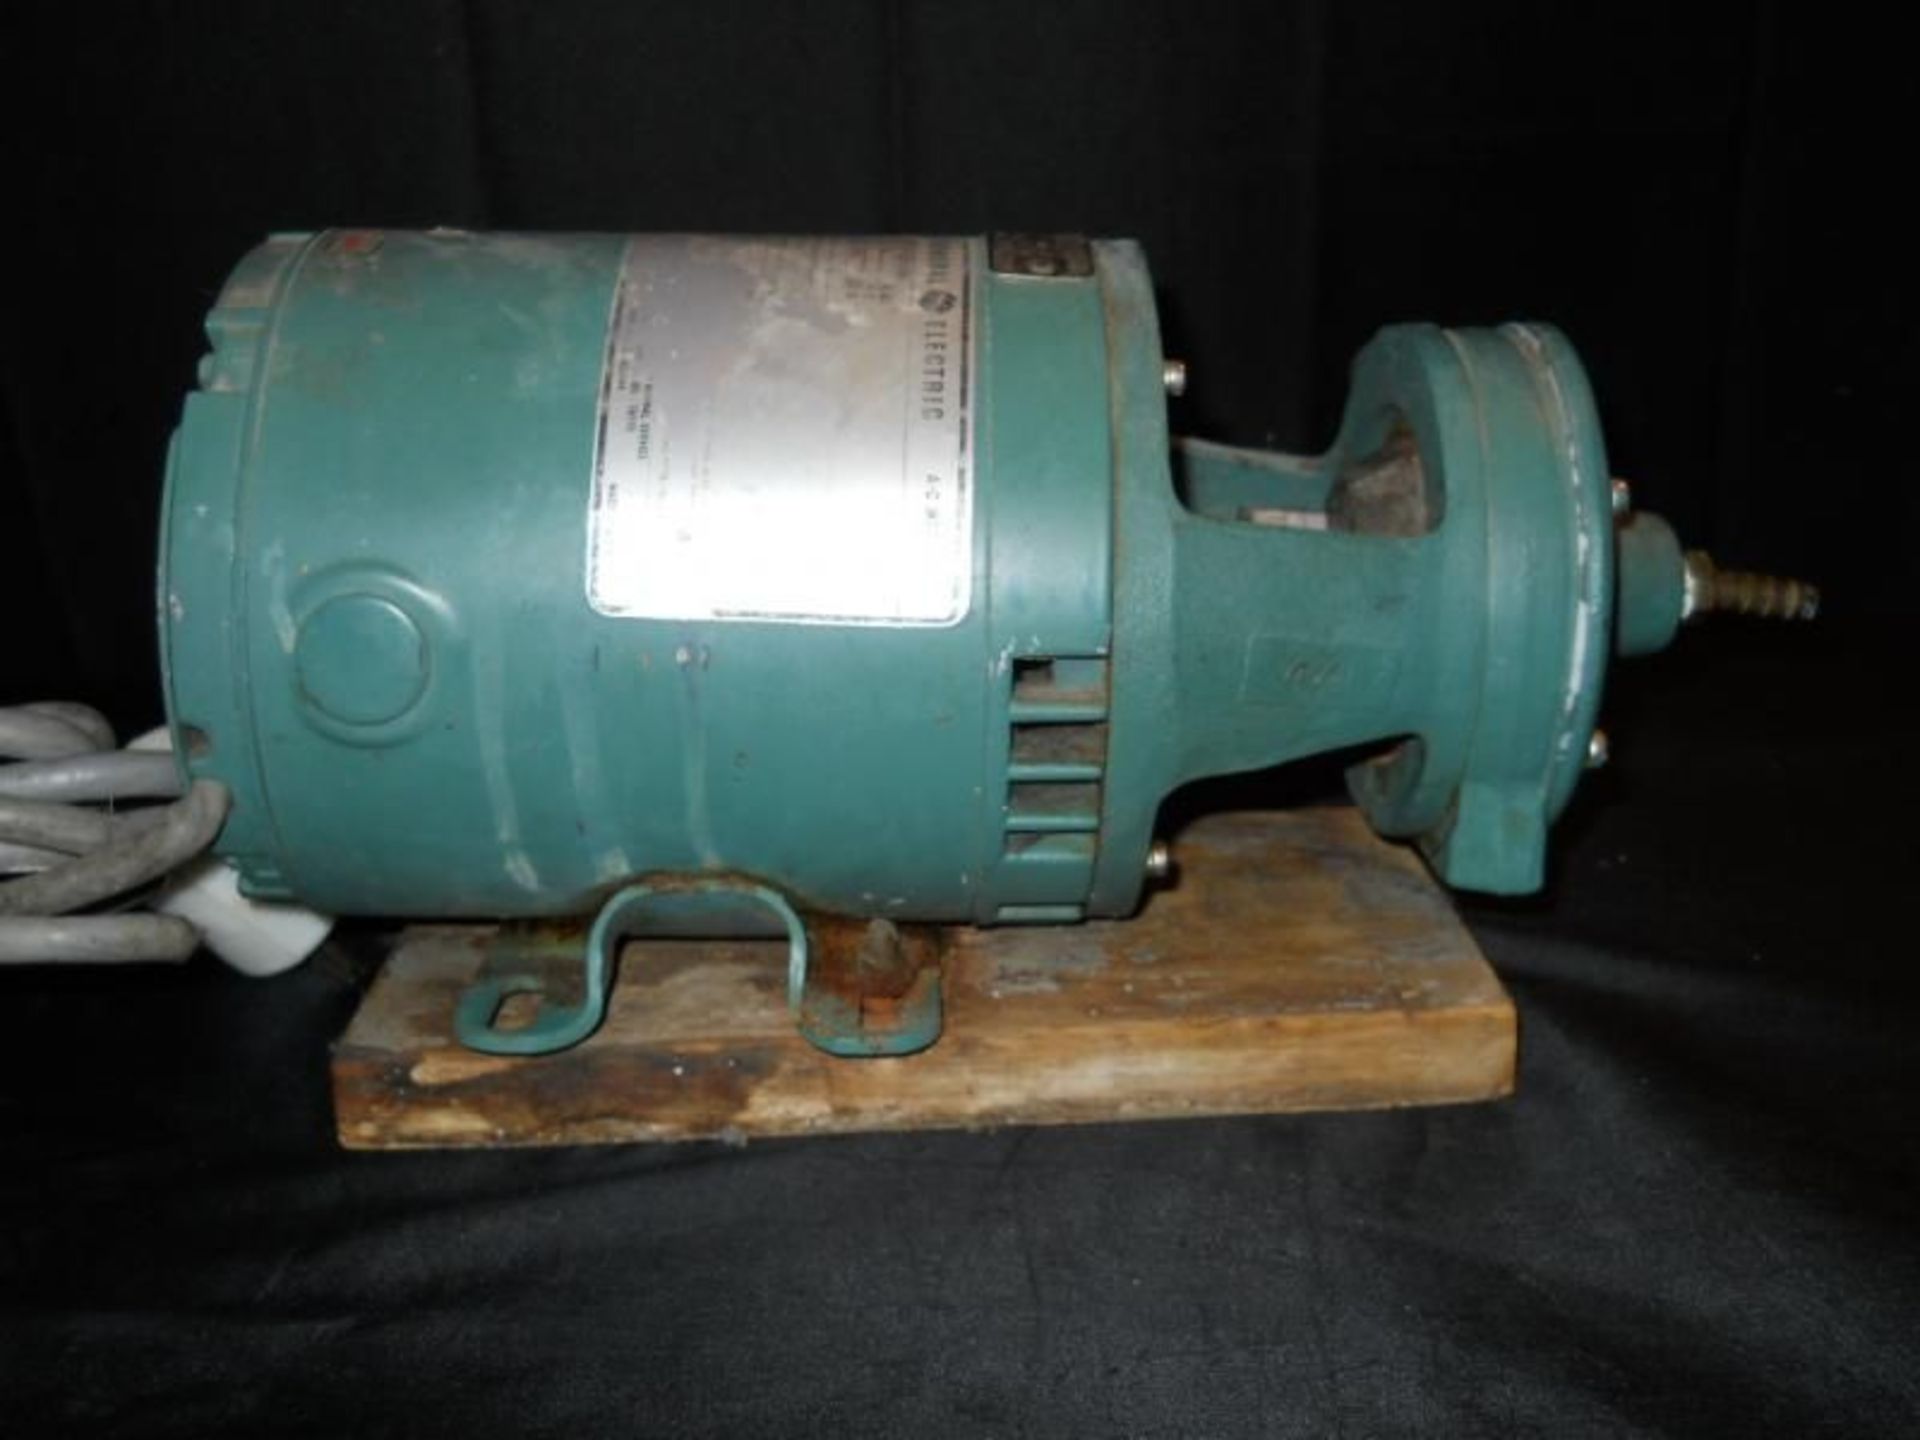 Eastern Pulsafeeder Pump Model D-6 (D6) w/ GE 1/8 HP Motor (1725 RPM), Qty 1, 321201000827 - Image 5 of 8